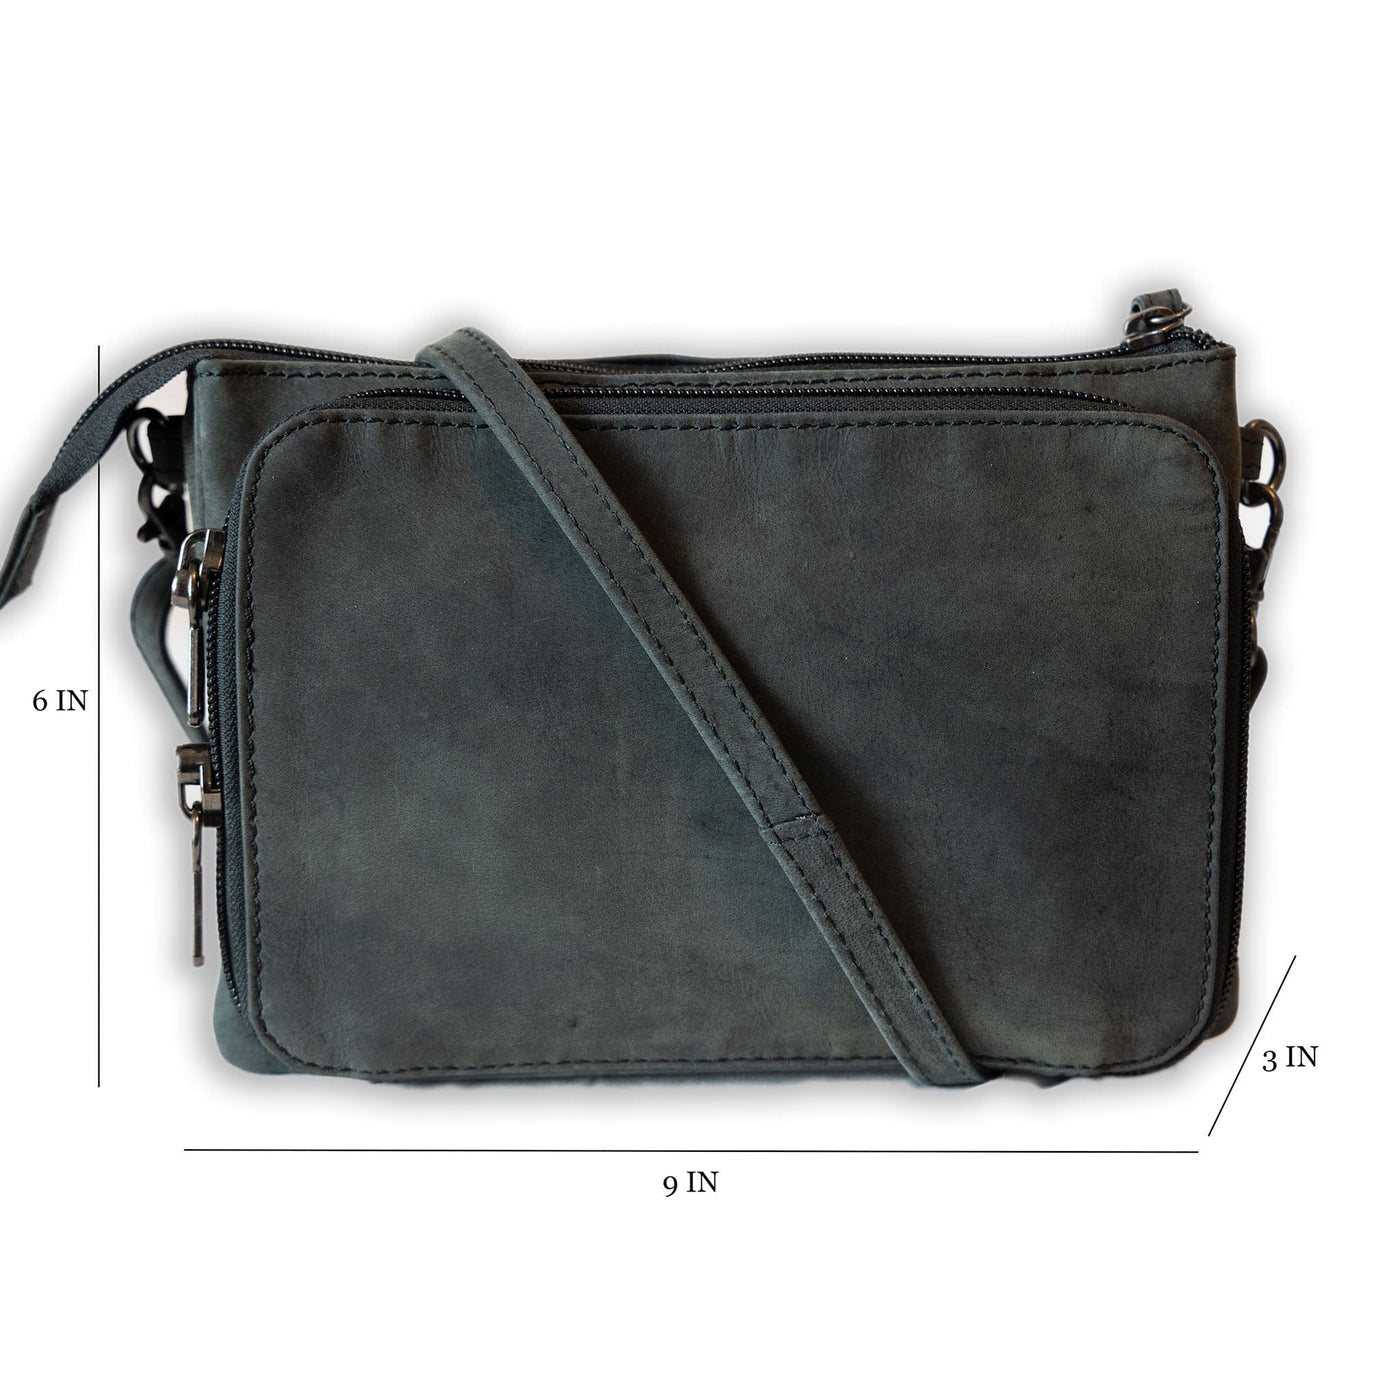 Concealed Carry Bobbie Crossbody Bag by UC Leather Company